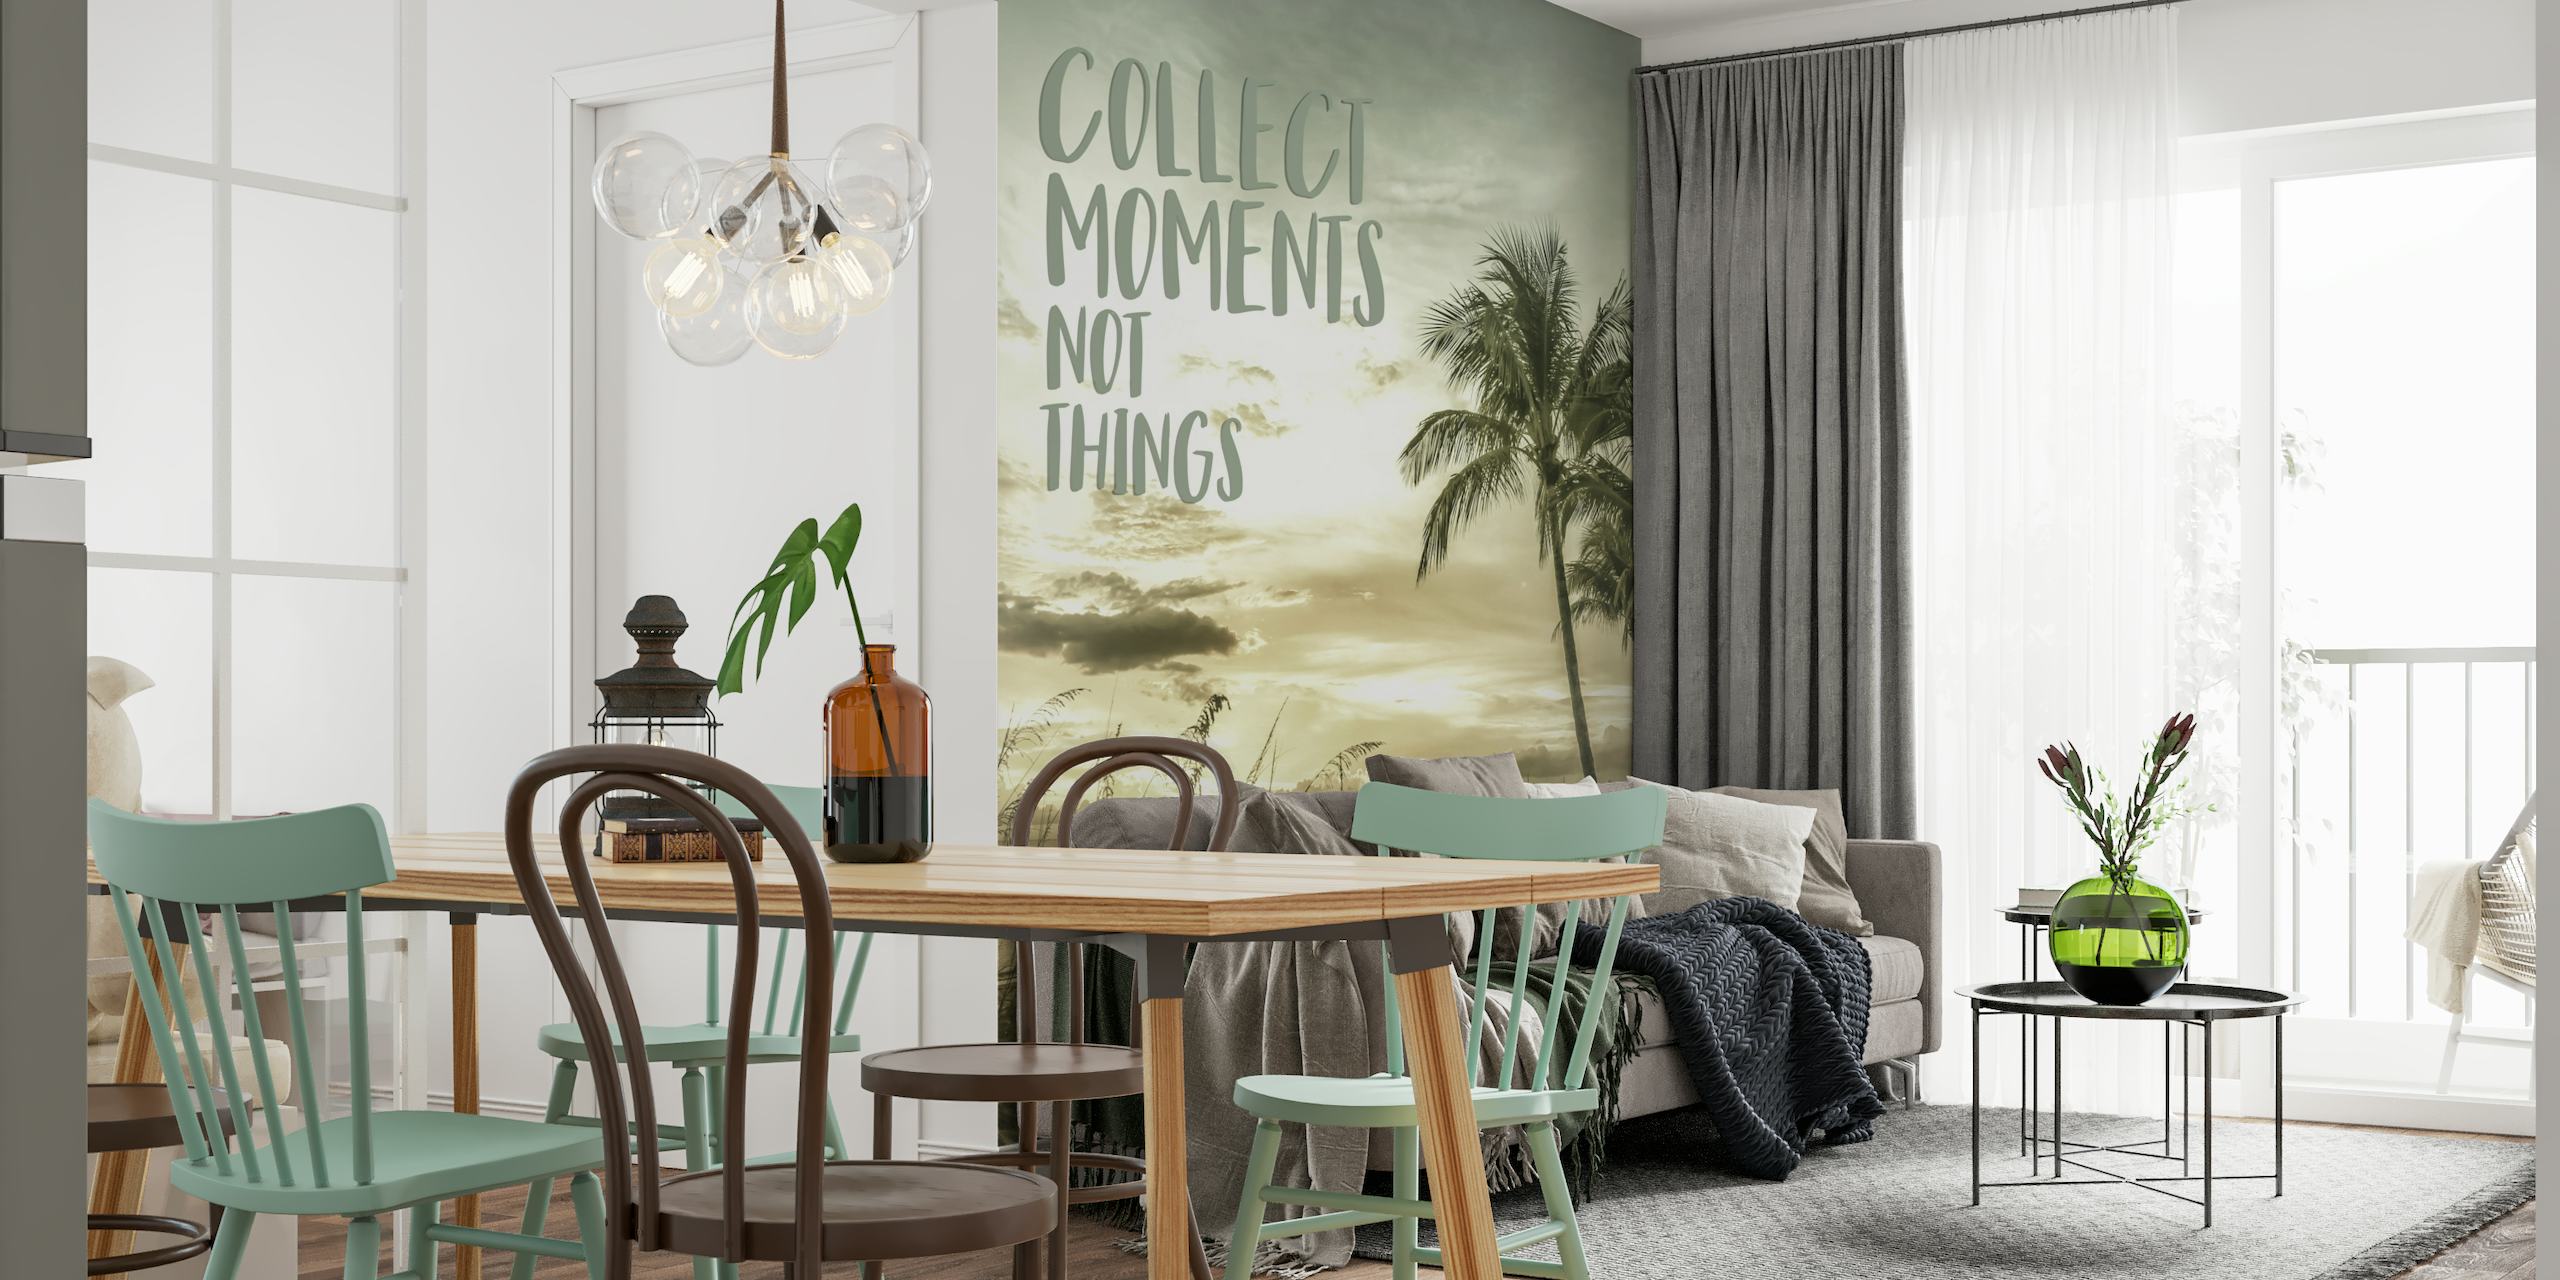 Collect moments not things | Sunset carta da parati